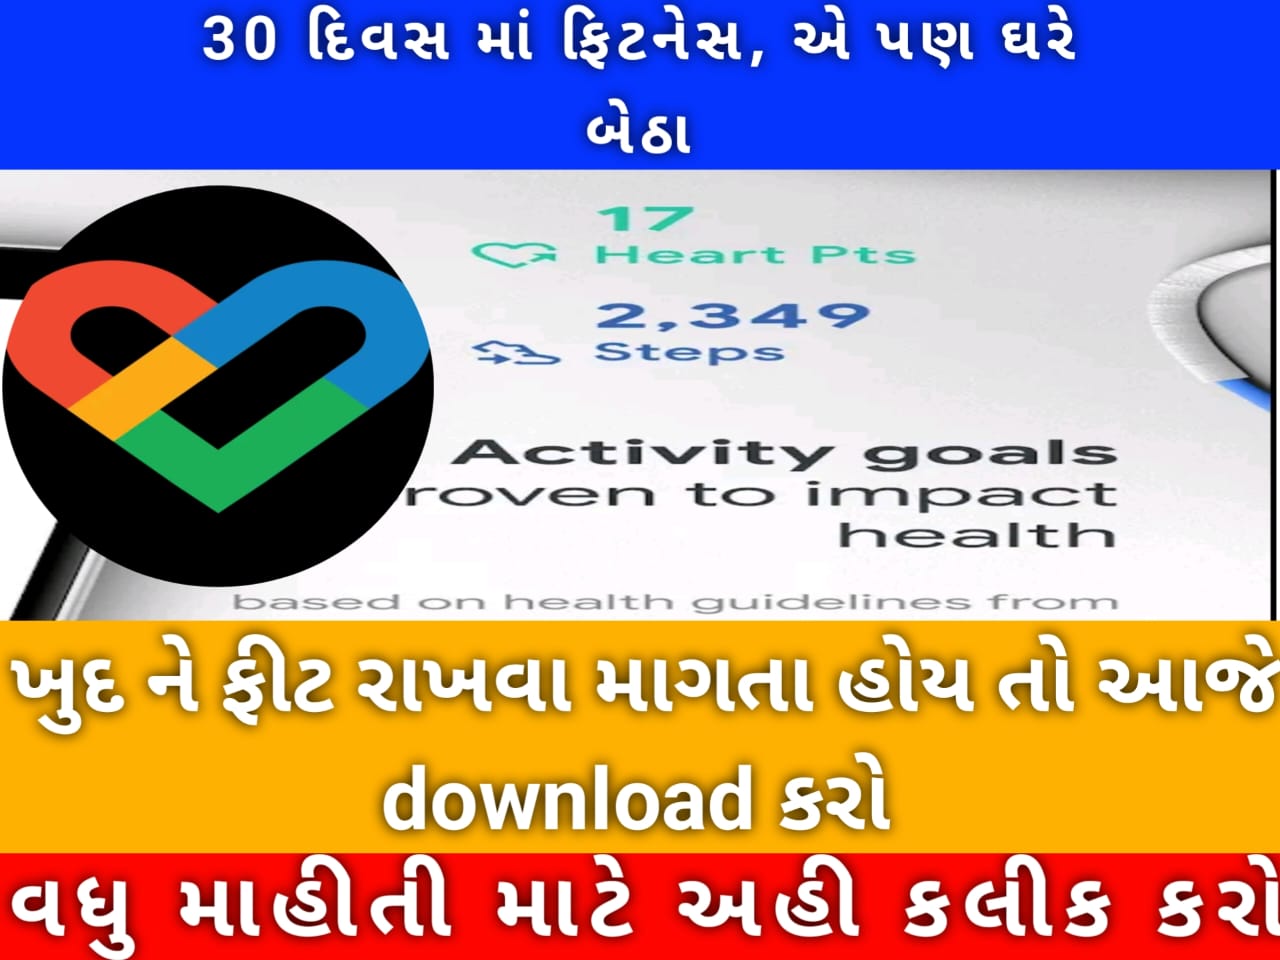 Google Fit Health and Activity Tracking App 2022